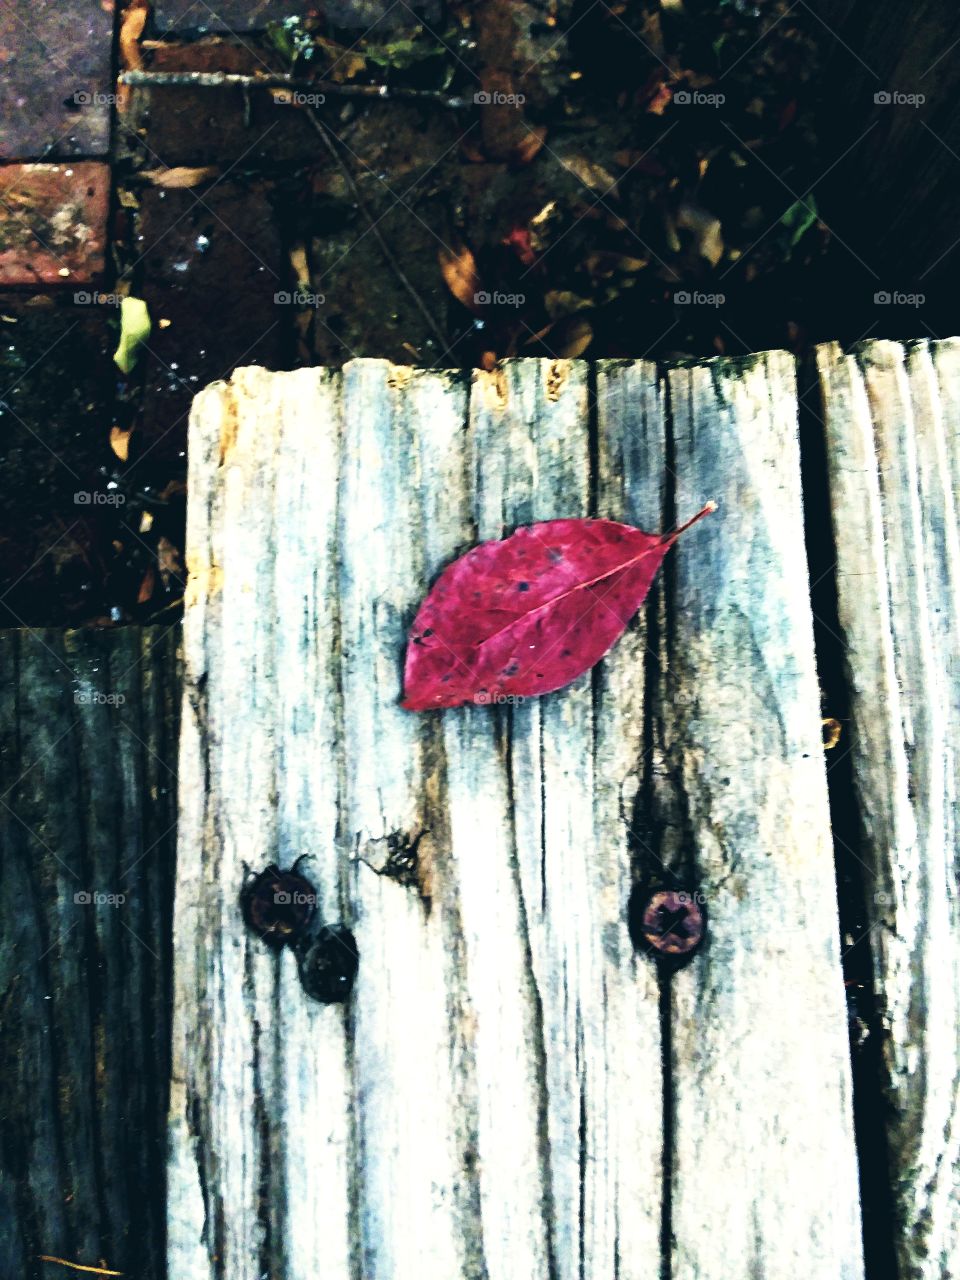 signs of autumn red leaf on wooden step